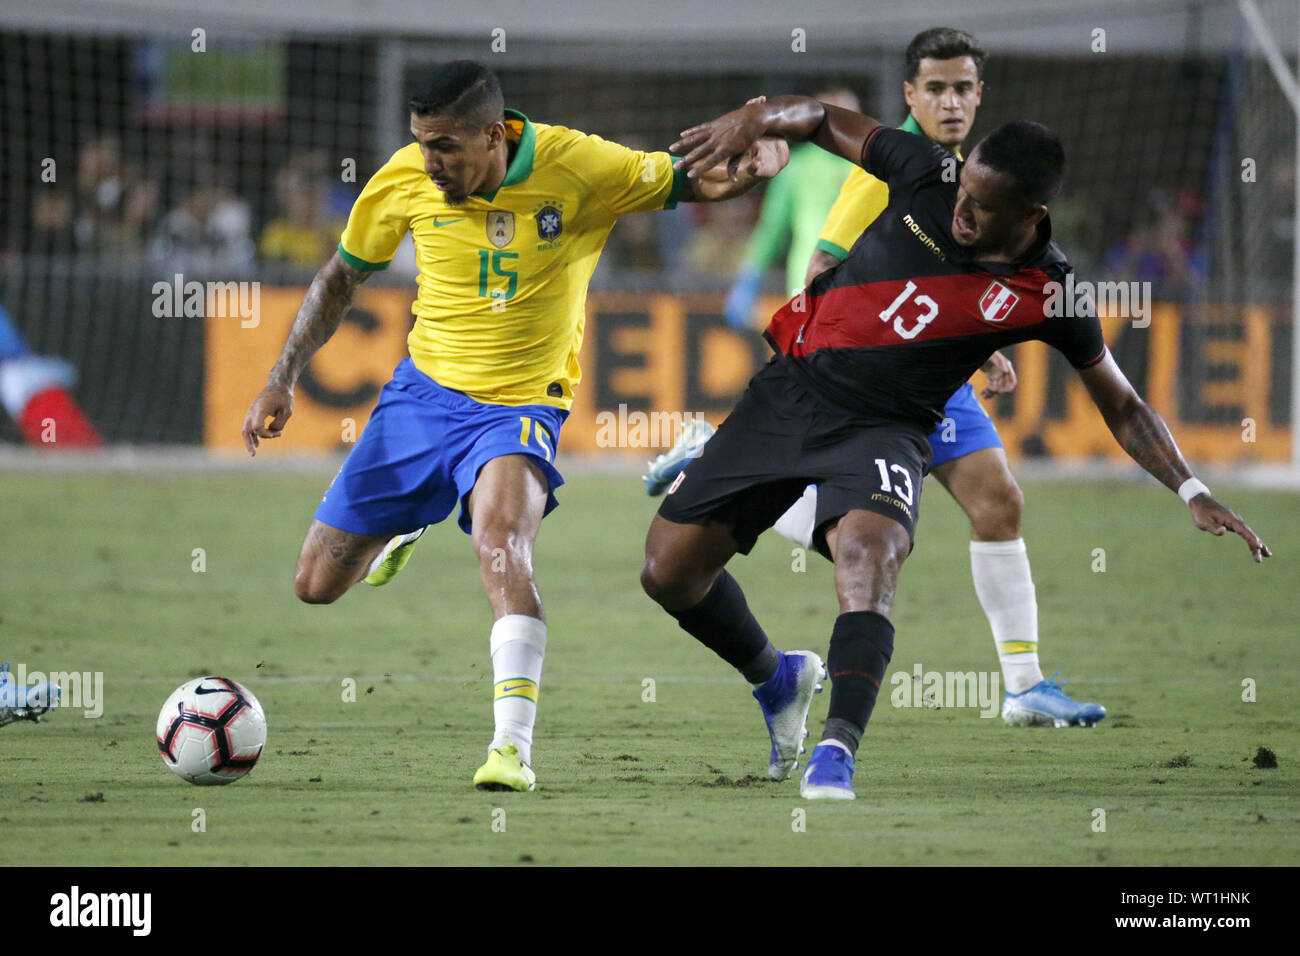 Los Angeles, California, USA. 10th Sep, 2019. Brazil midfielder Allan (15) and Peru midfielder Renato Tapia (13) vie for the ball during an International Friendly Soccer match between Brazil and Peru at the Los Angeles Memorial Coliseum in Los Angeles on Tuesday, September 10, 2019. Credit: Ringo Chiu/ZUMA Wire/Alamy Live News Stock Photo